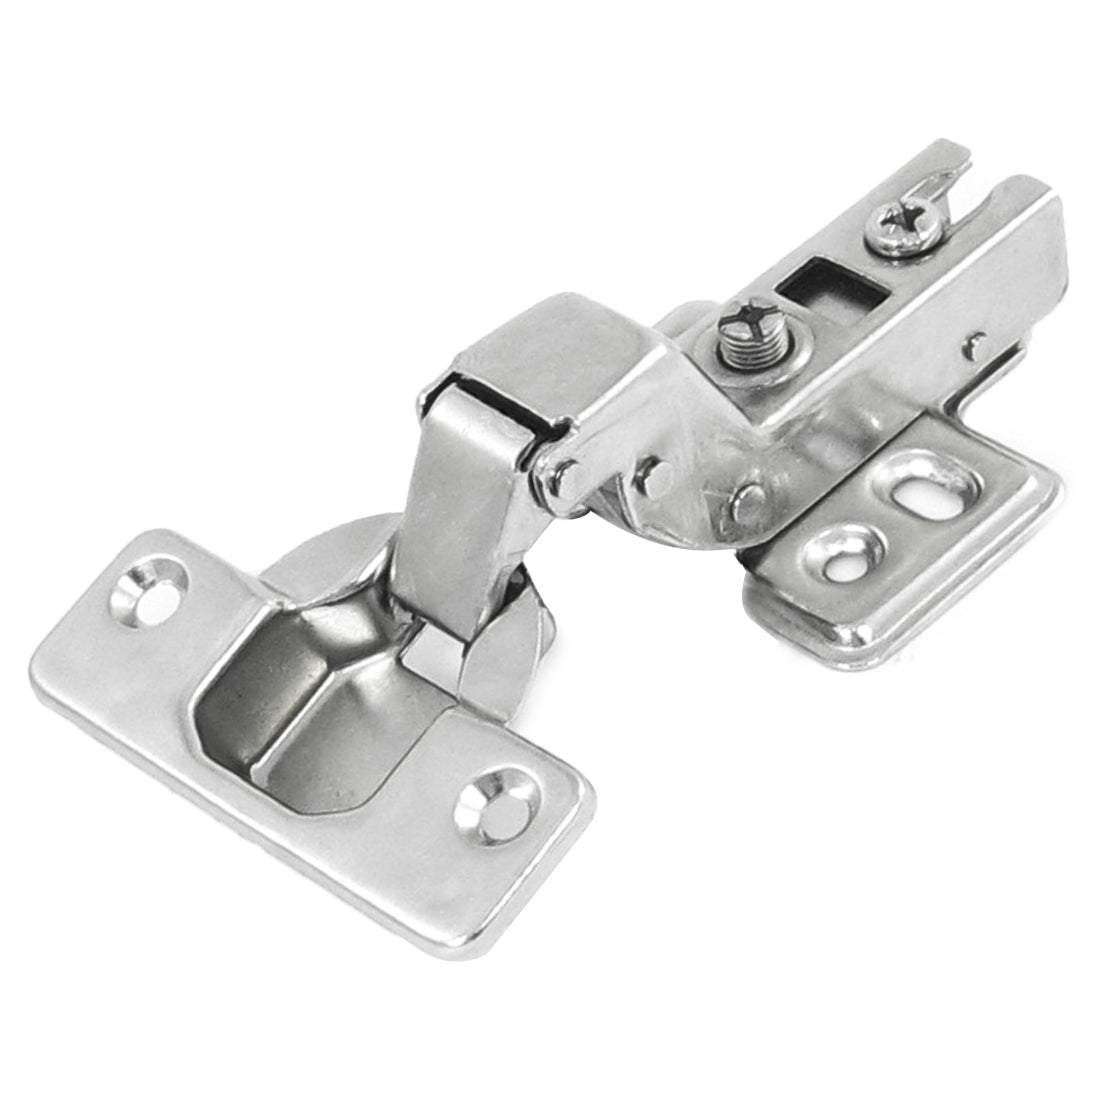 uxcell Uxcell Silver Tone Stainless Steel Furniture Insert Concealed Cabinet Hinge 4.3"